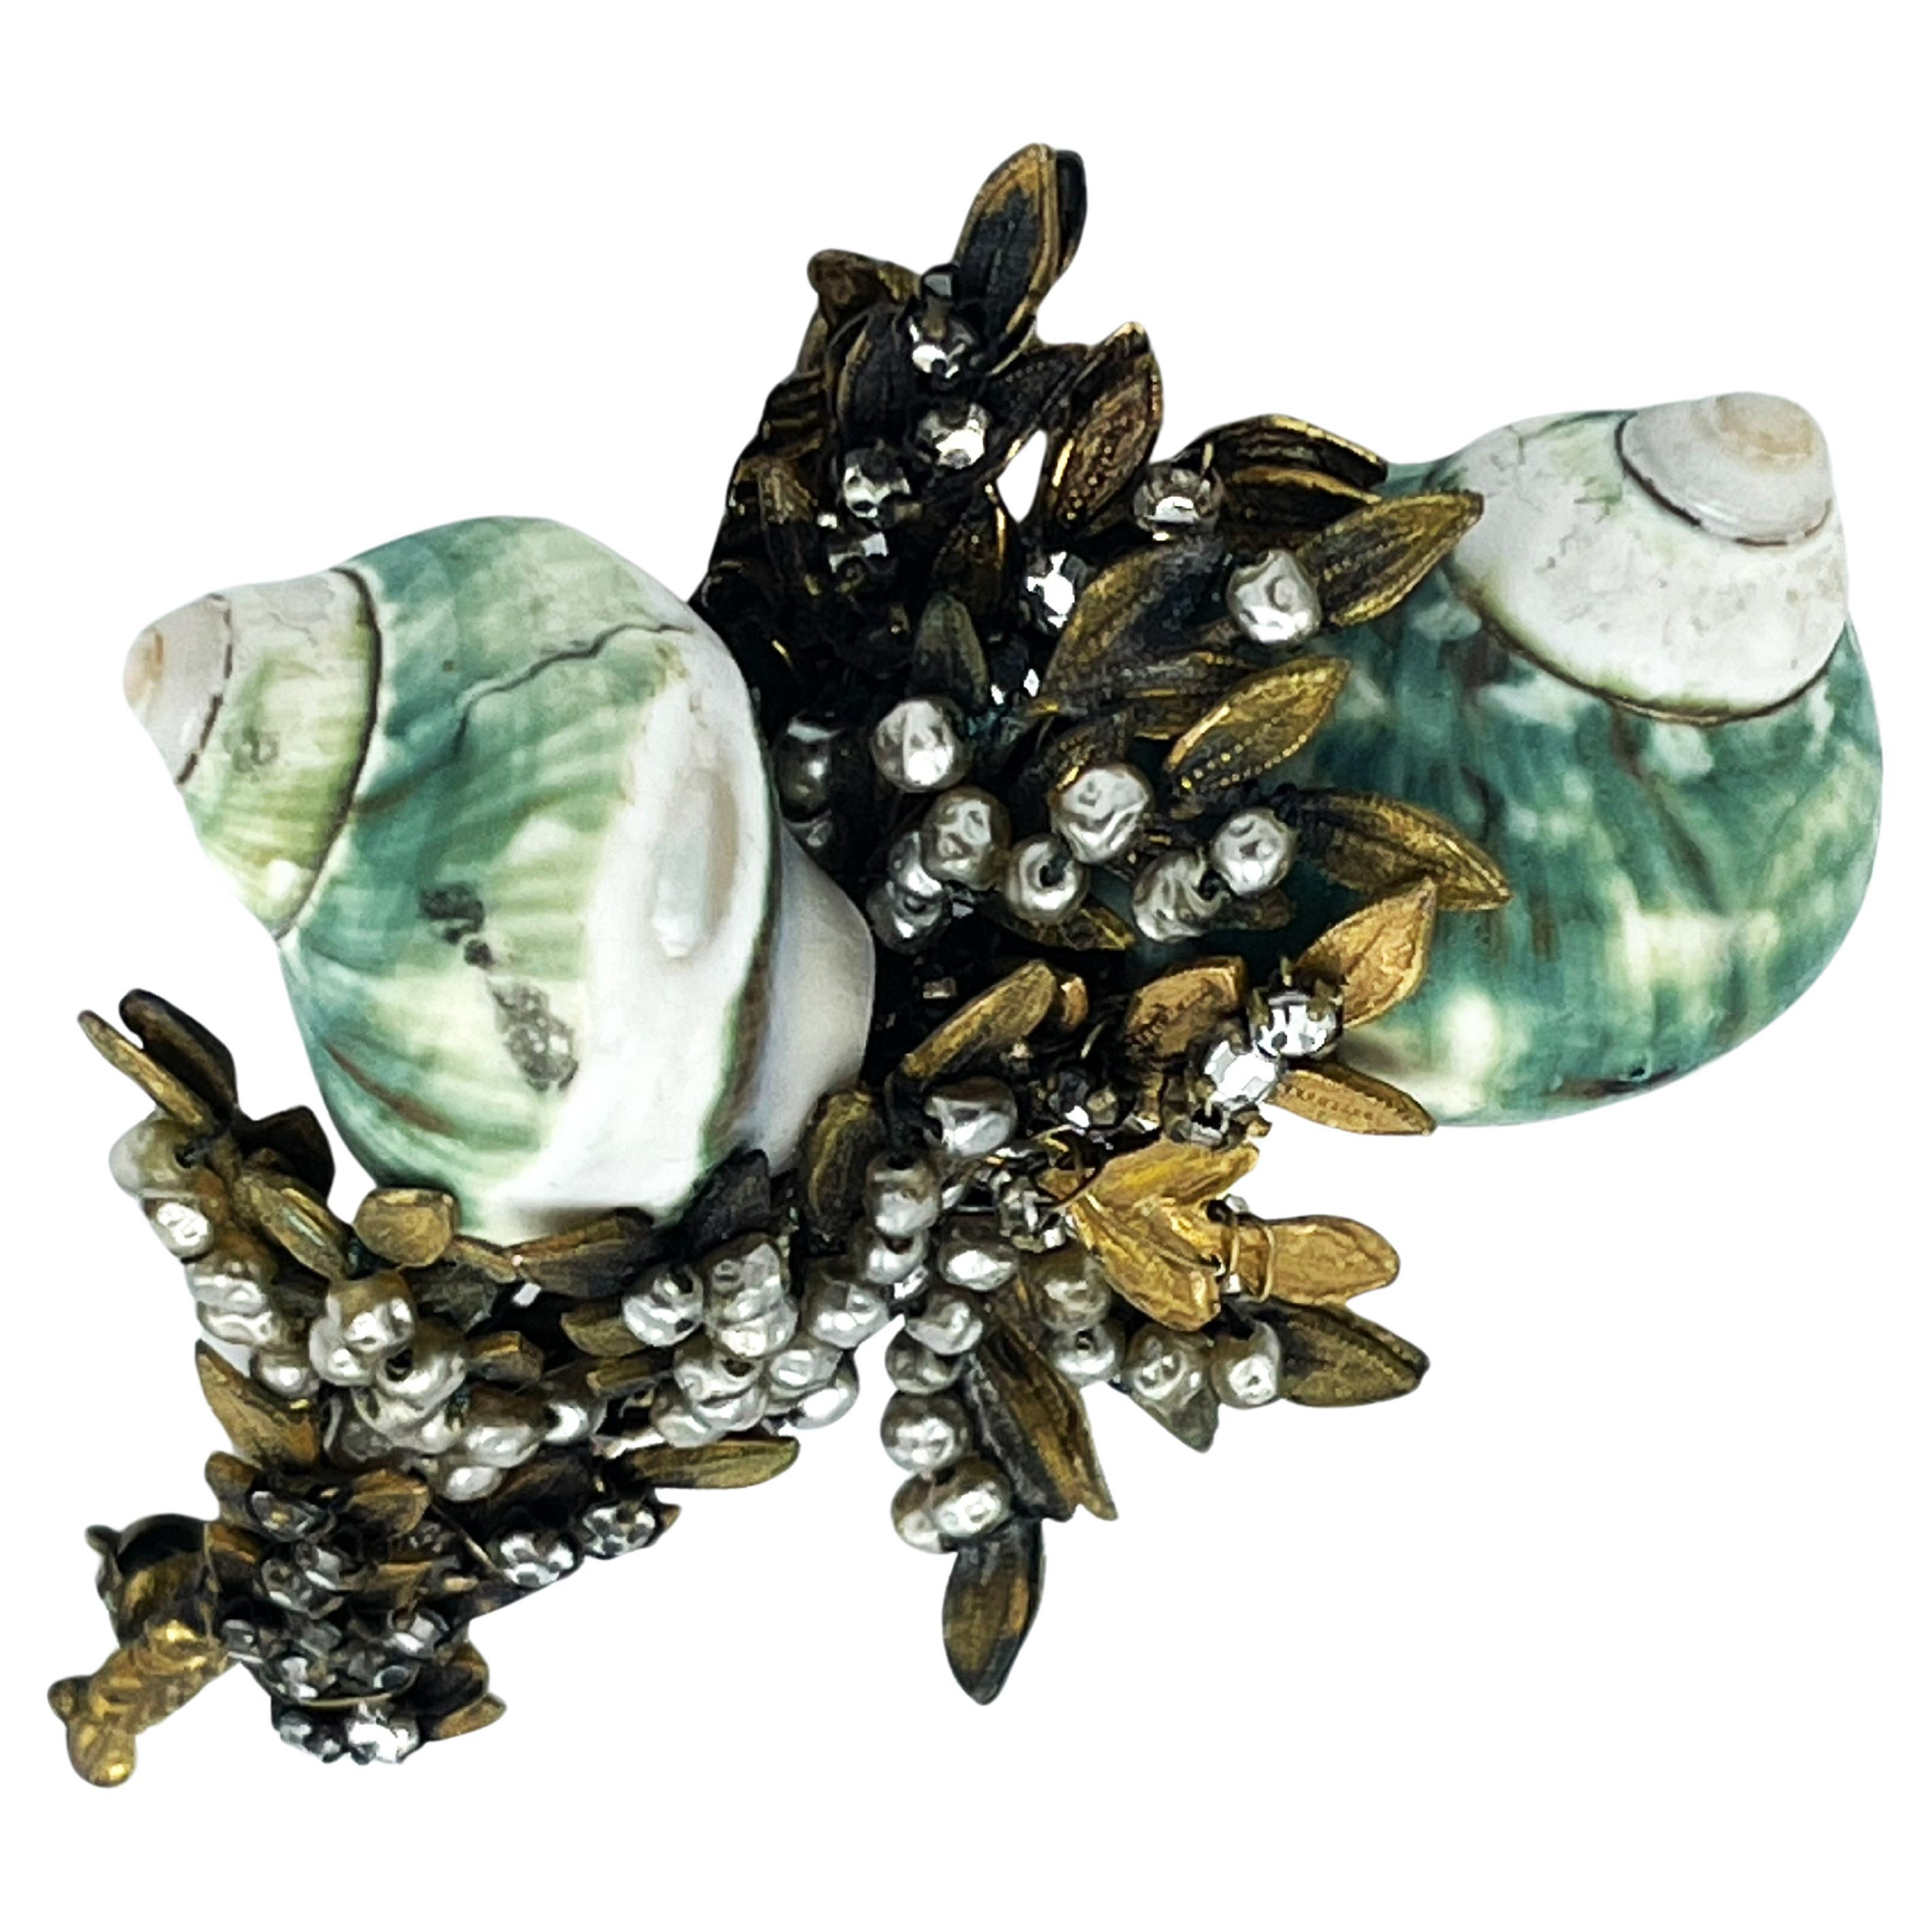 The early jewelry by Miriam Haskell often reflected themes from nature that would be carried throughout the history of the company. Vines, leaves, flowers, butterflies and here now snails!
Brooch with matching earrings, decorated with snails, leaves